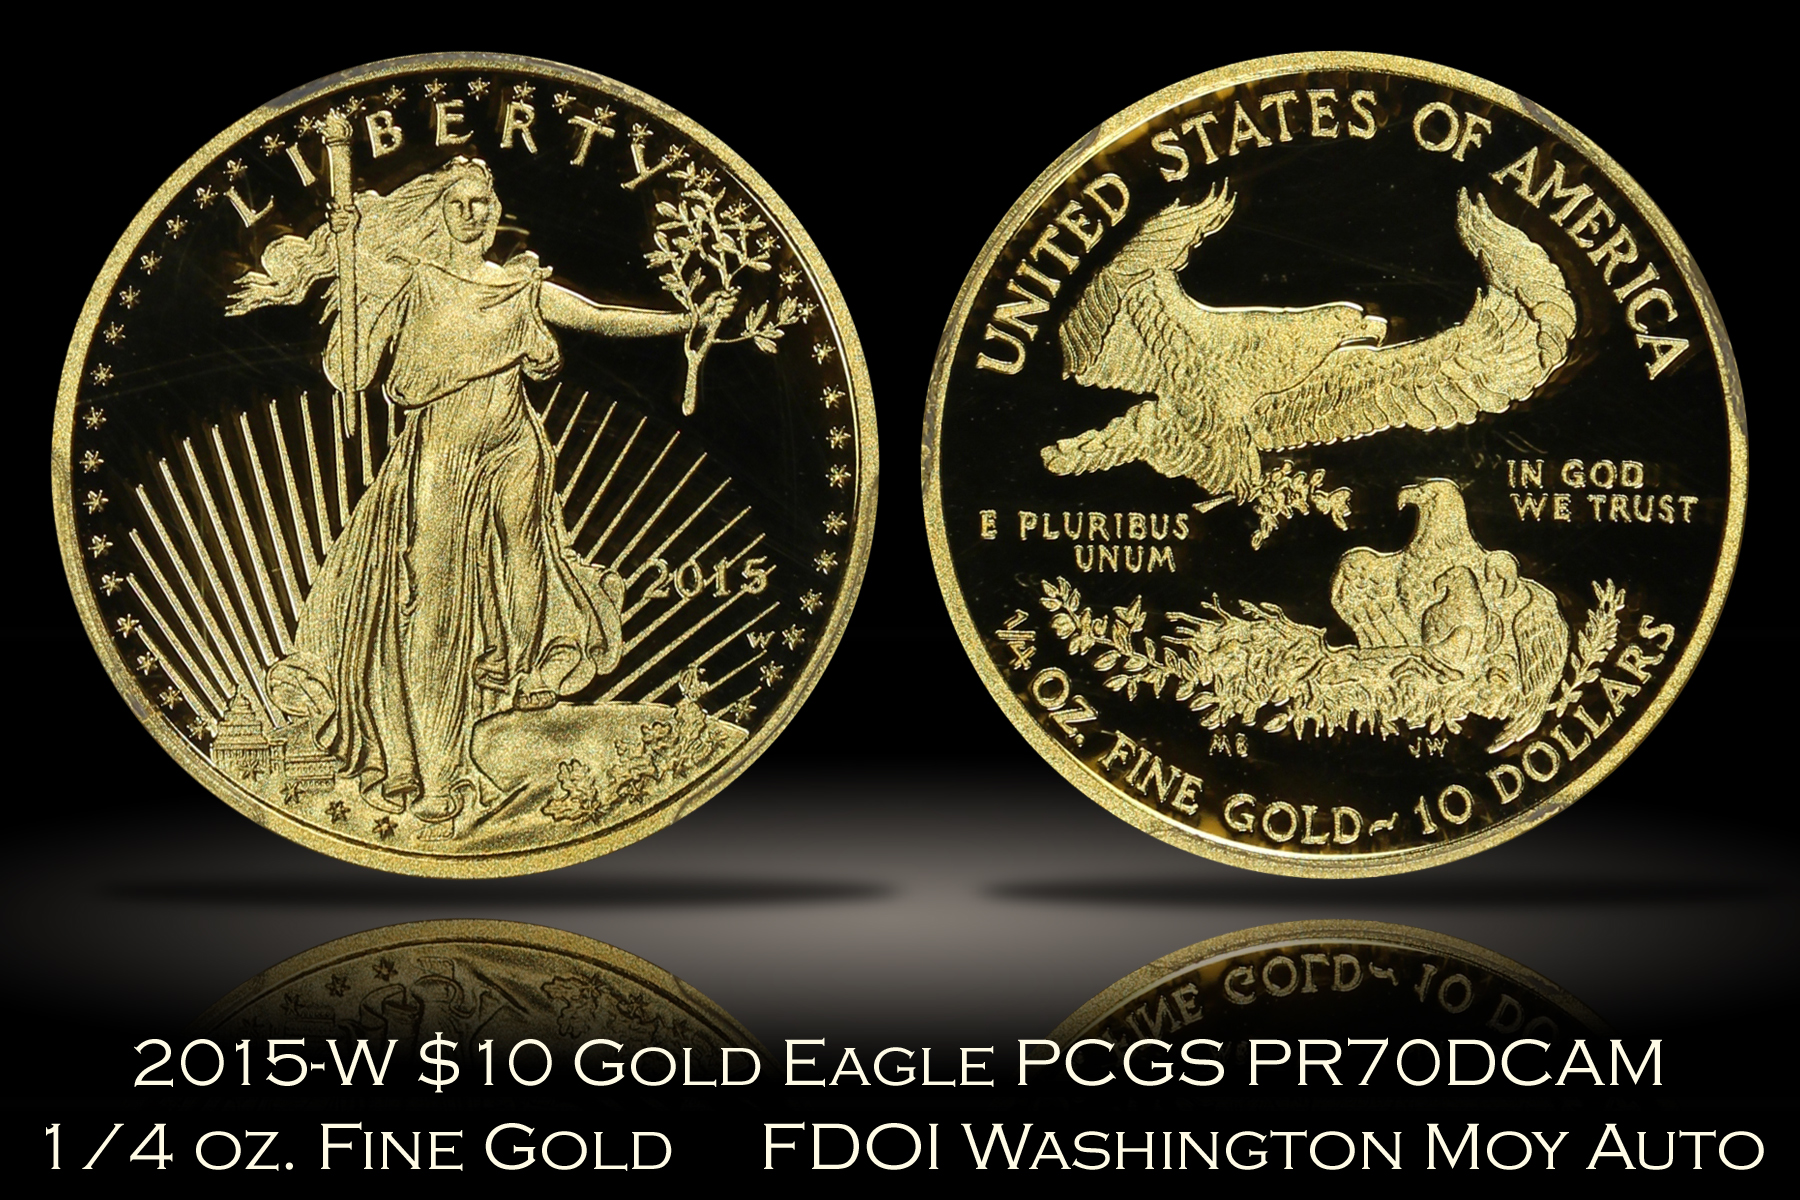 2015-W $10 Gold Eagle PCGS PR70DCAM First Day of Issue Washington DC